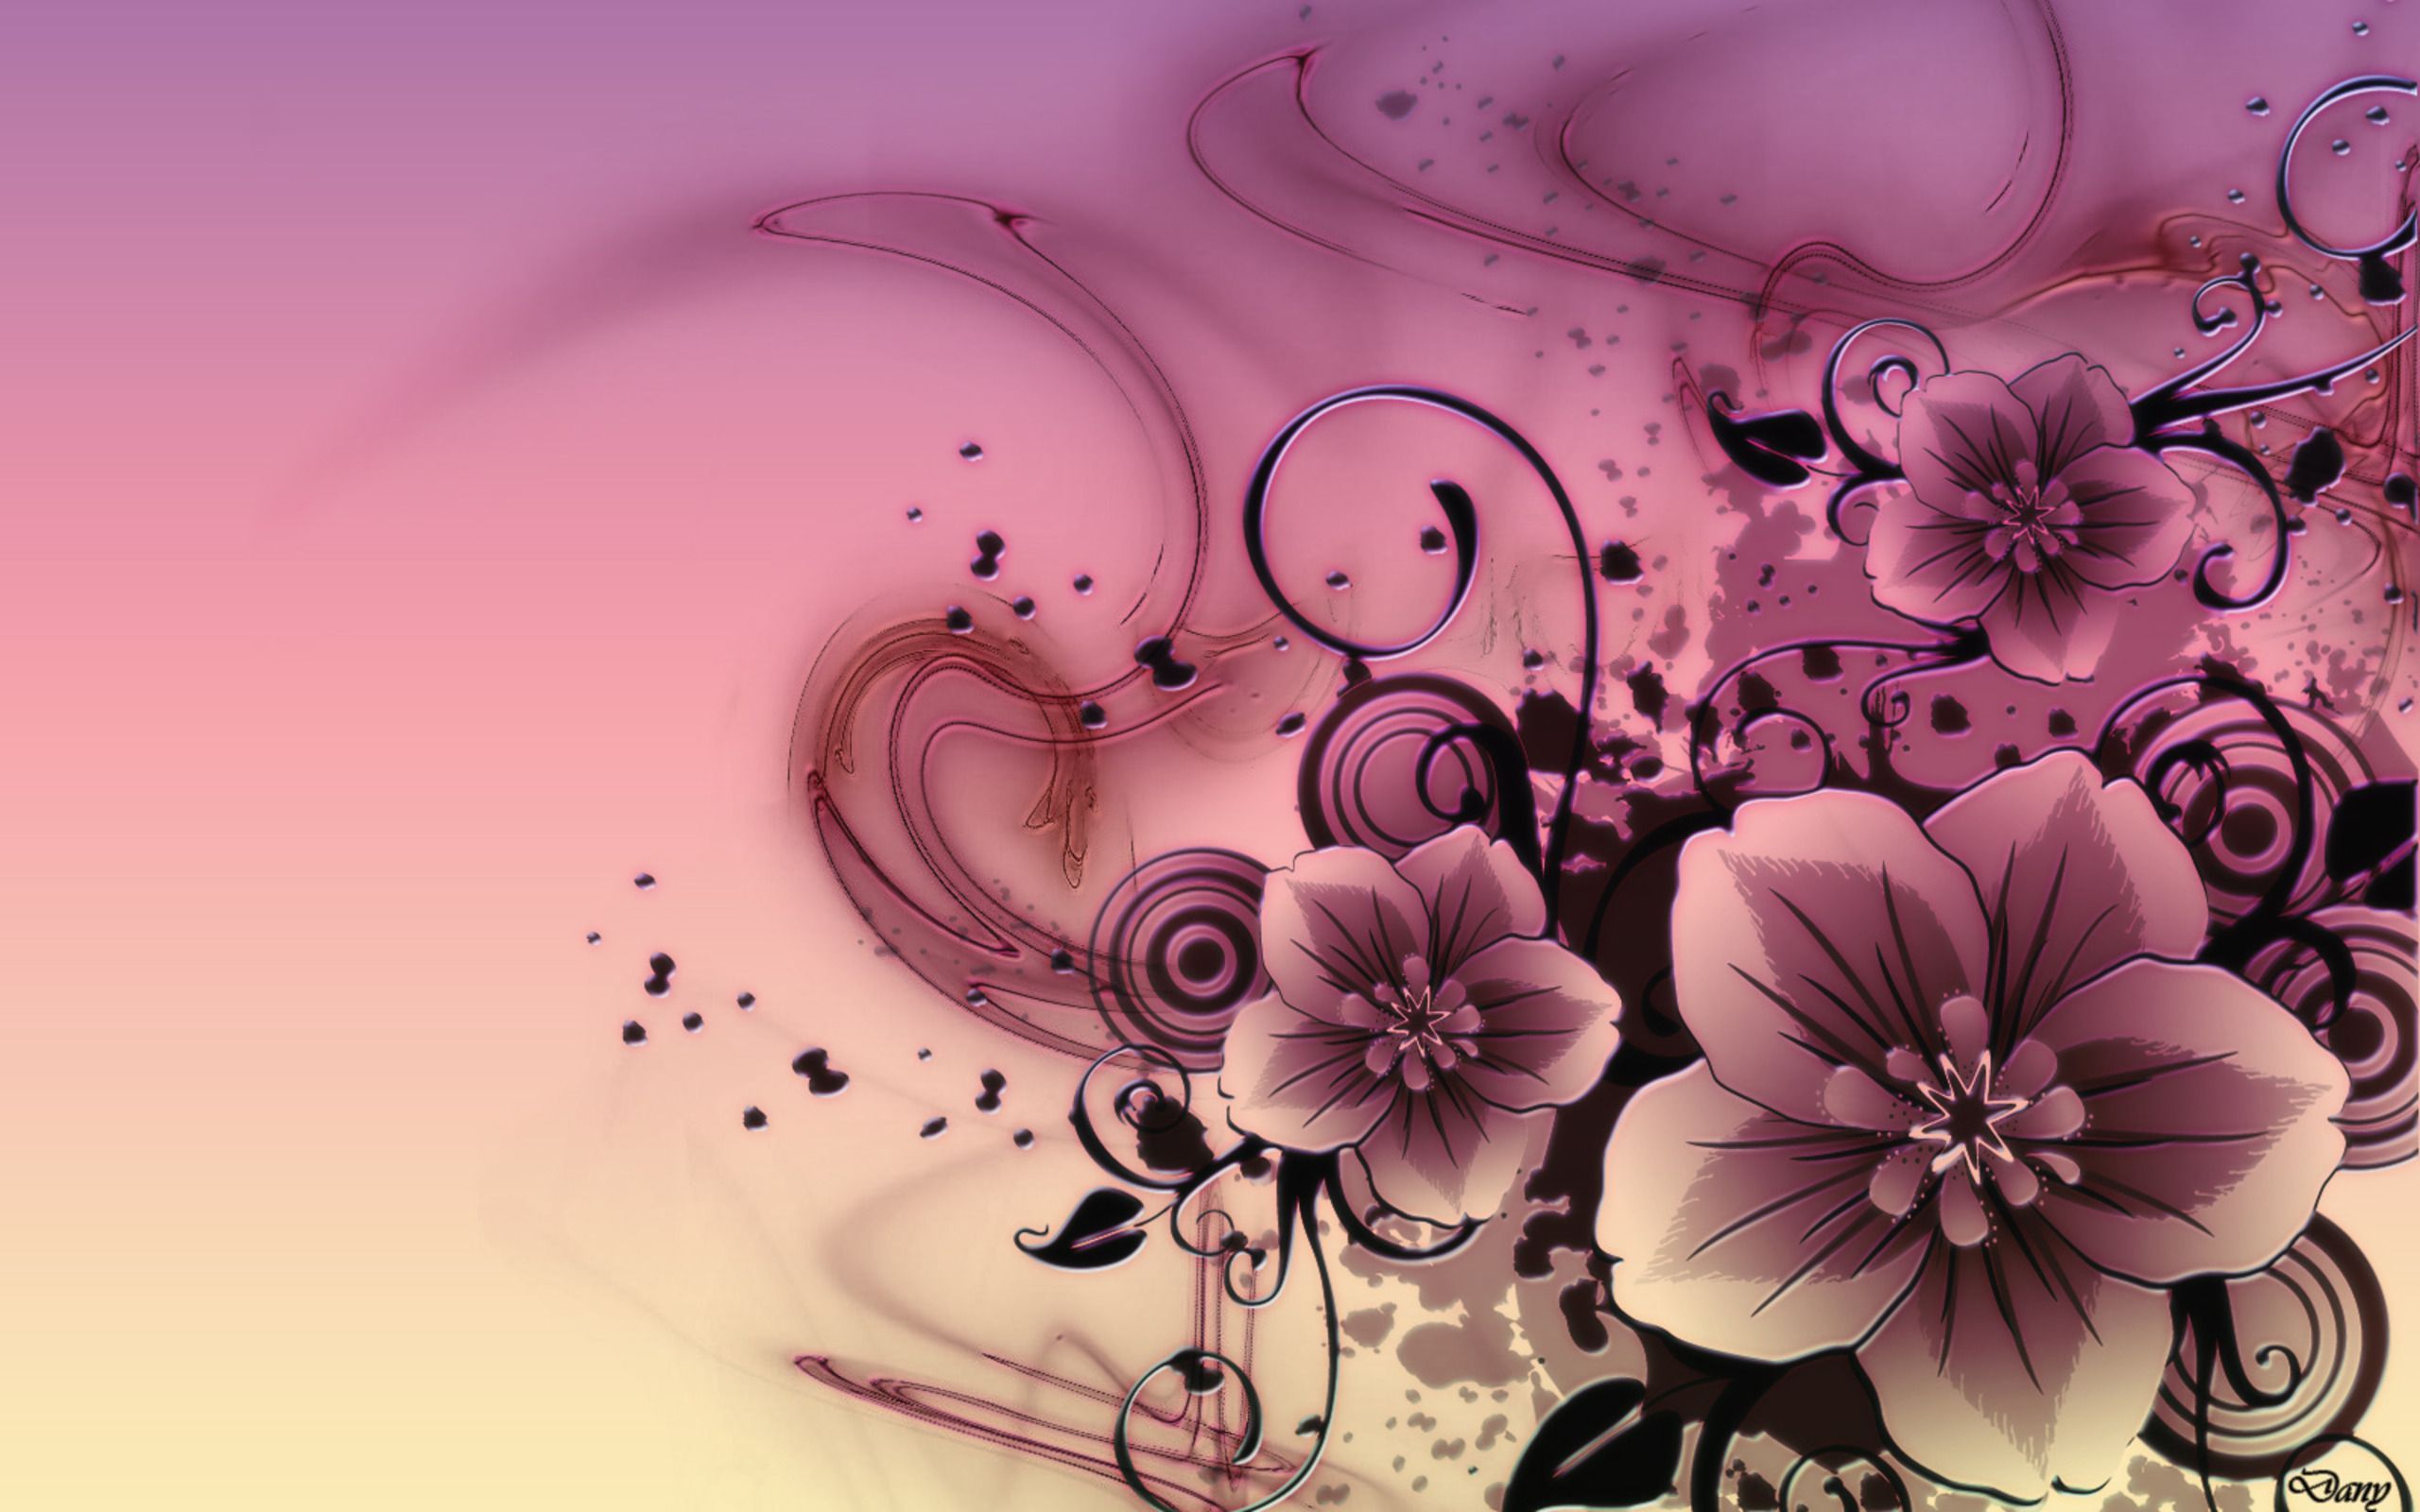 Abstract Spring Flowers Wallpaper Free Abstract Spring Flowers Background